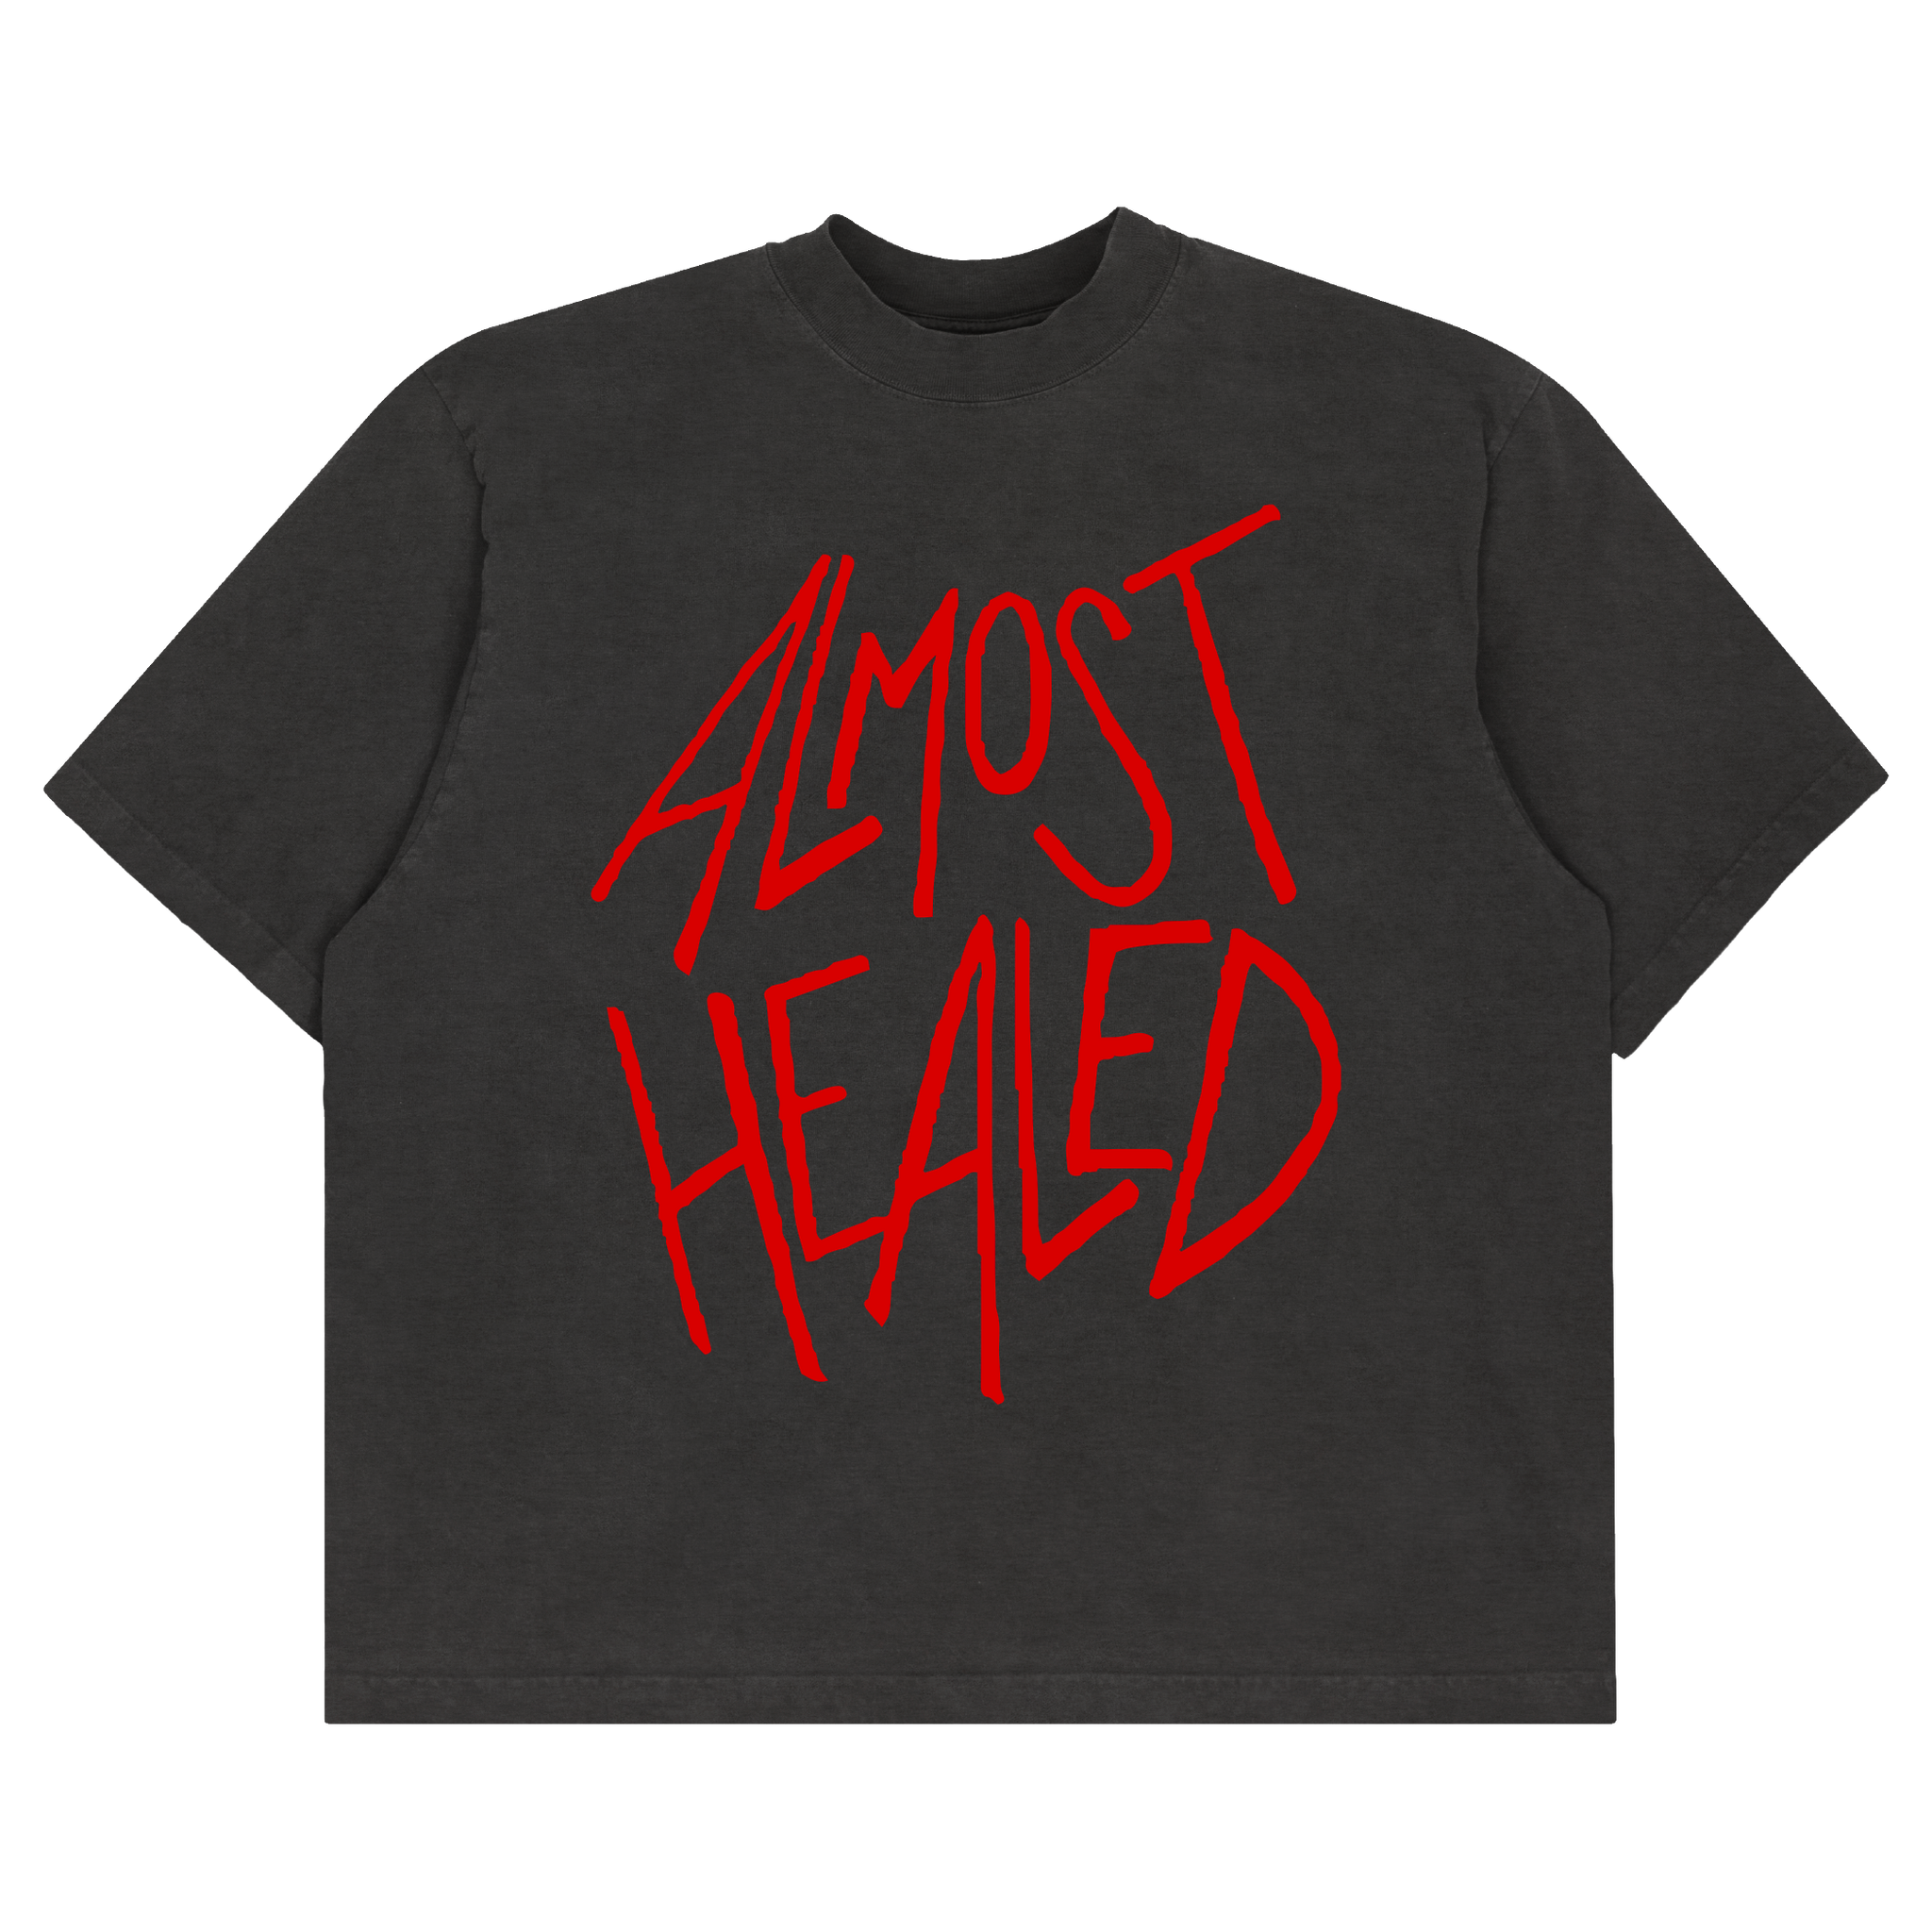 ALMOST HEALED "ALL MY LIFE" T-SHIRT BLACK